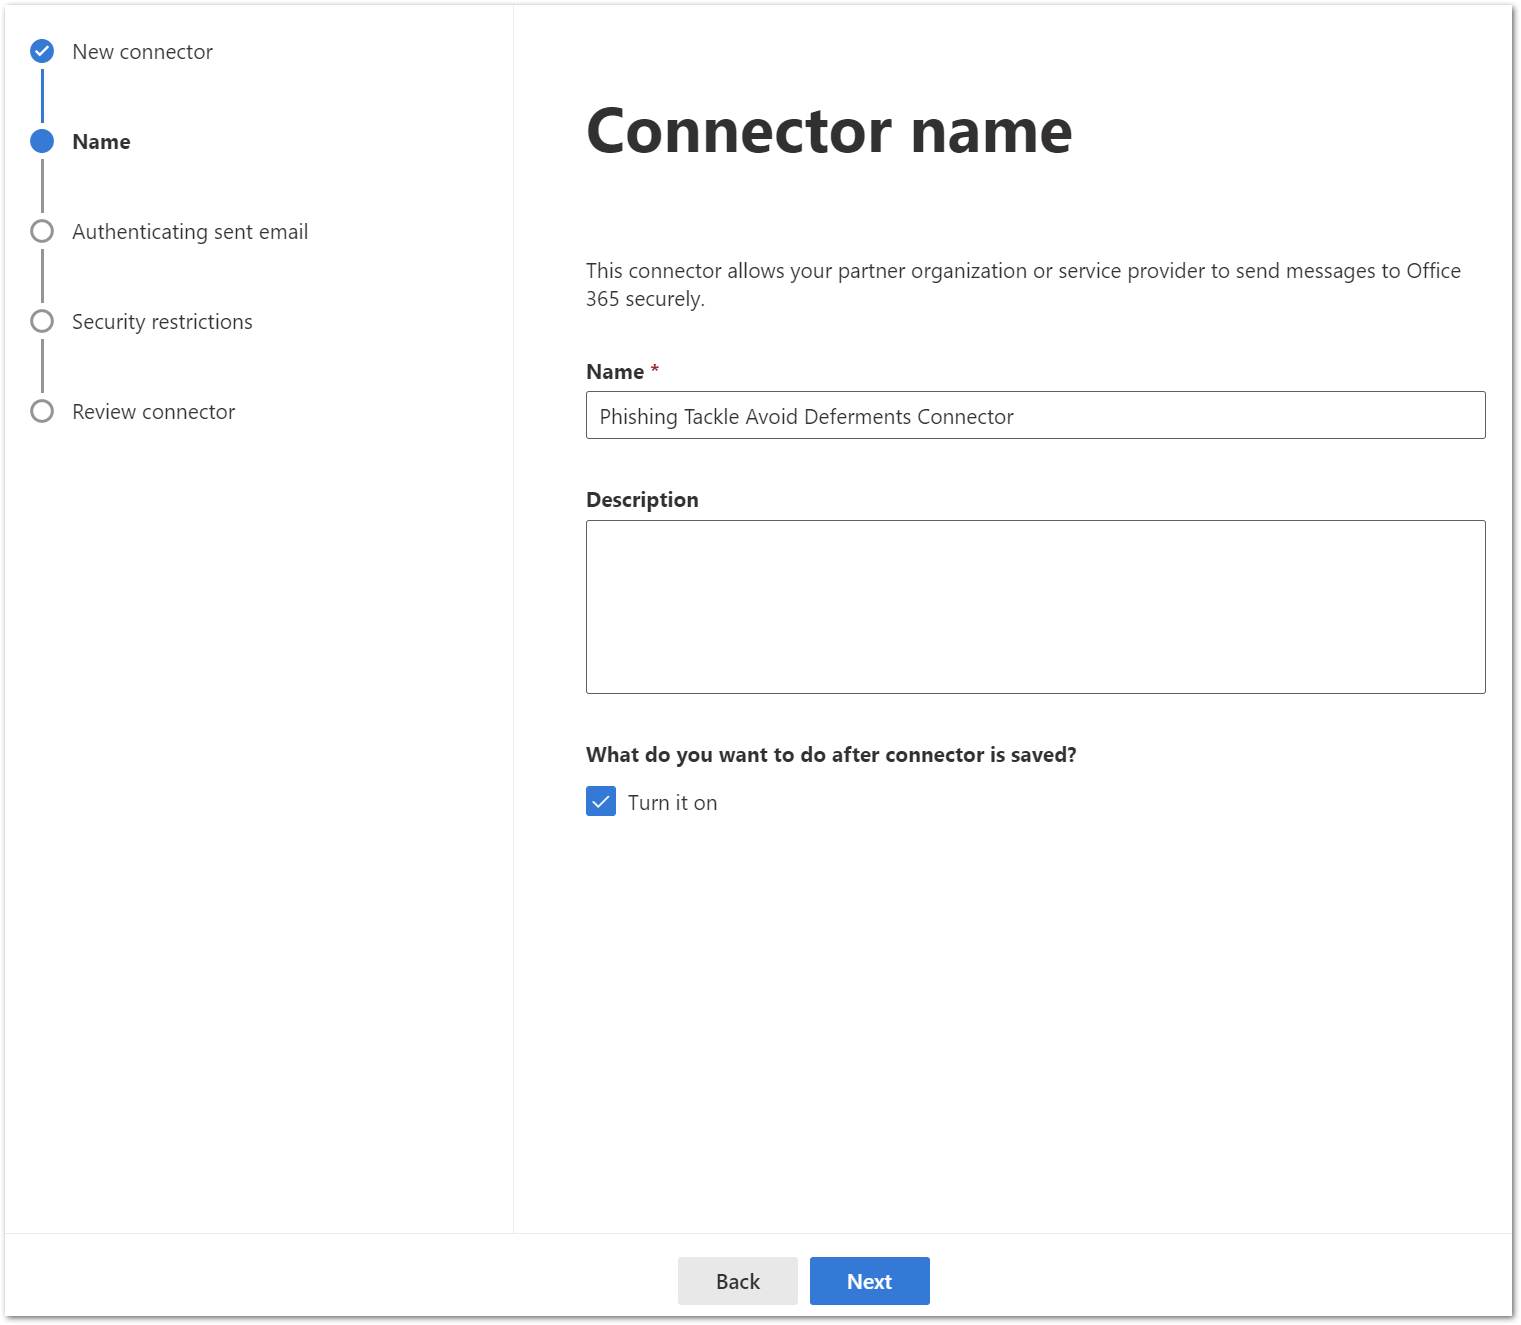 Create_a_Connector_in_Microsoft_365_-_Connector_Name.png